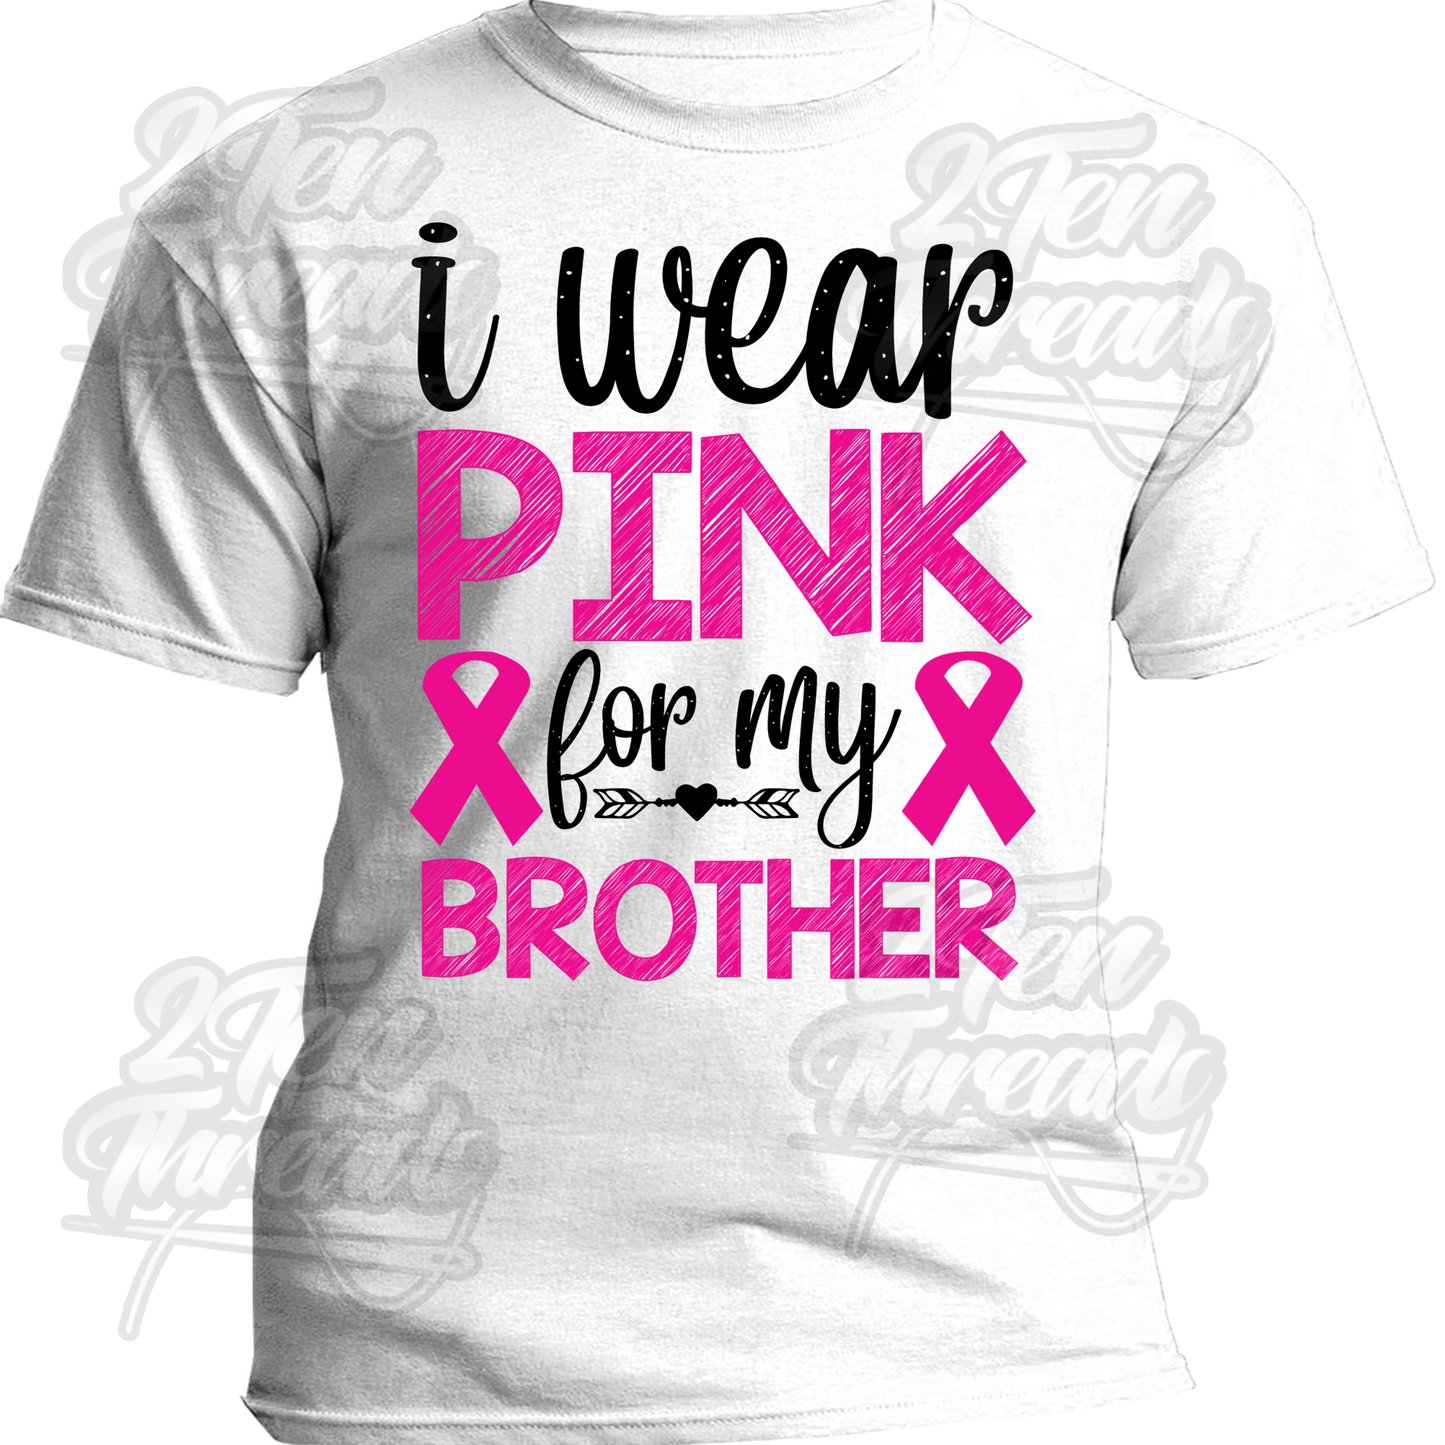 Pink for my Brother shirt